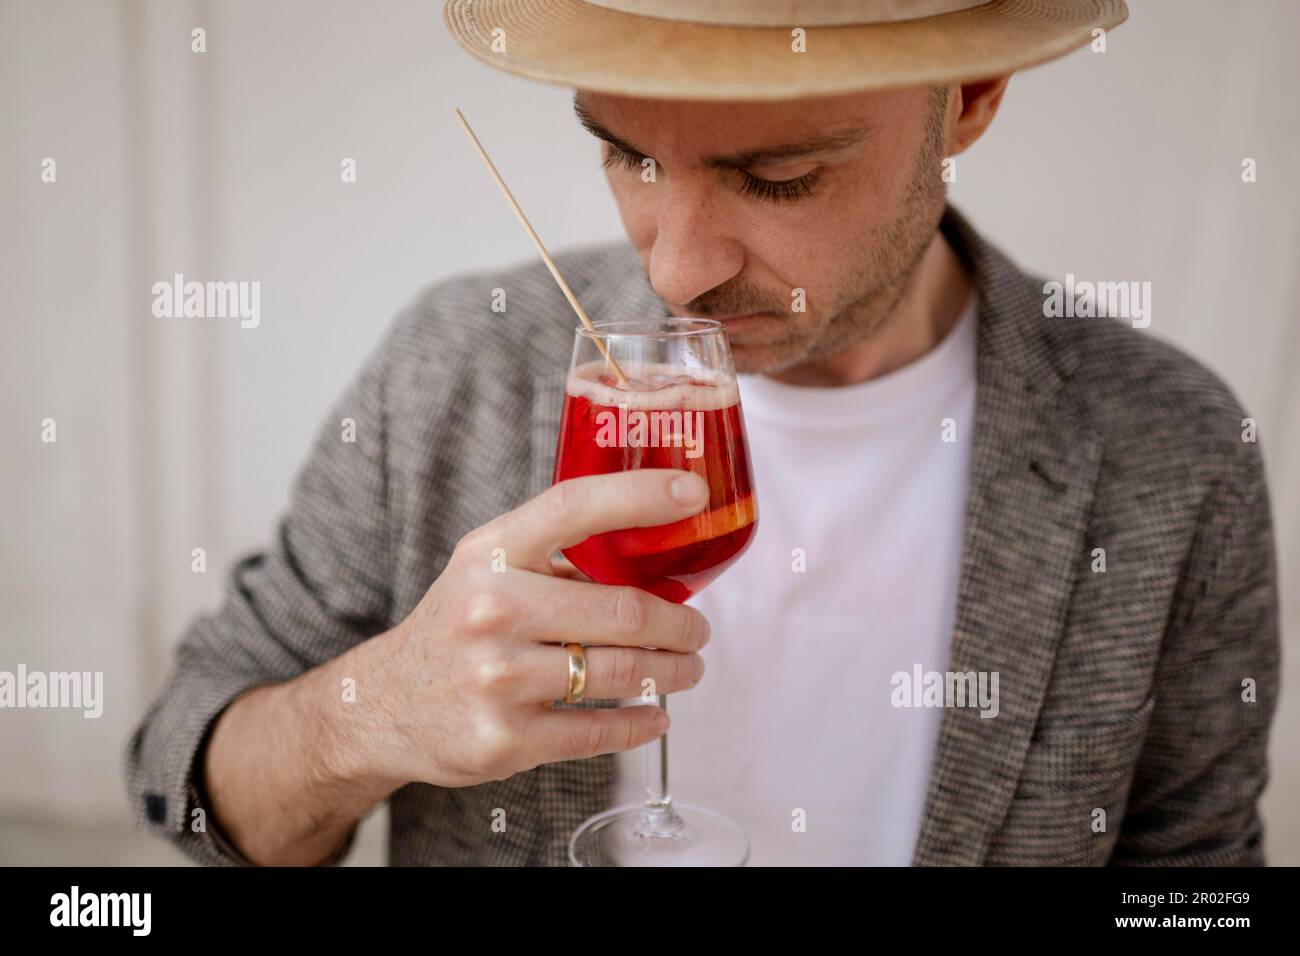 Man with a hat and a glass of Aperol Spritz Stock Photo